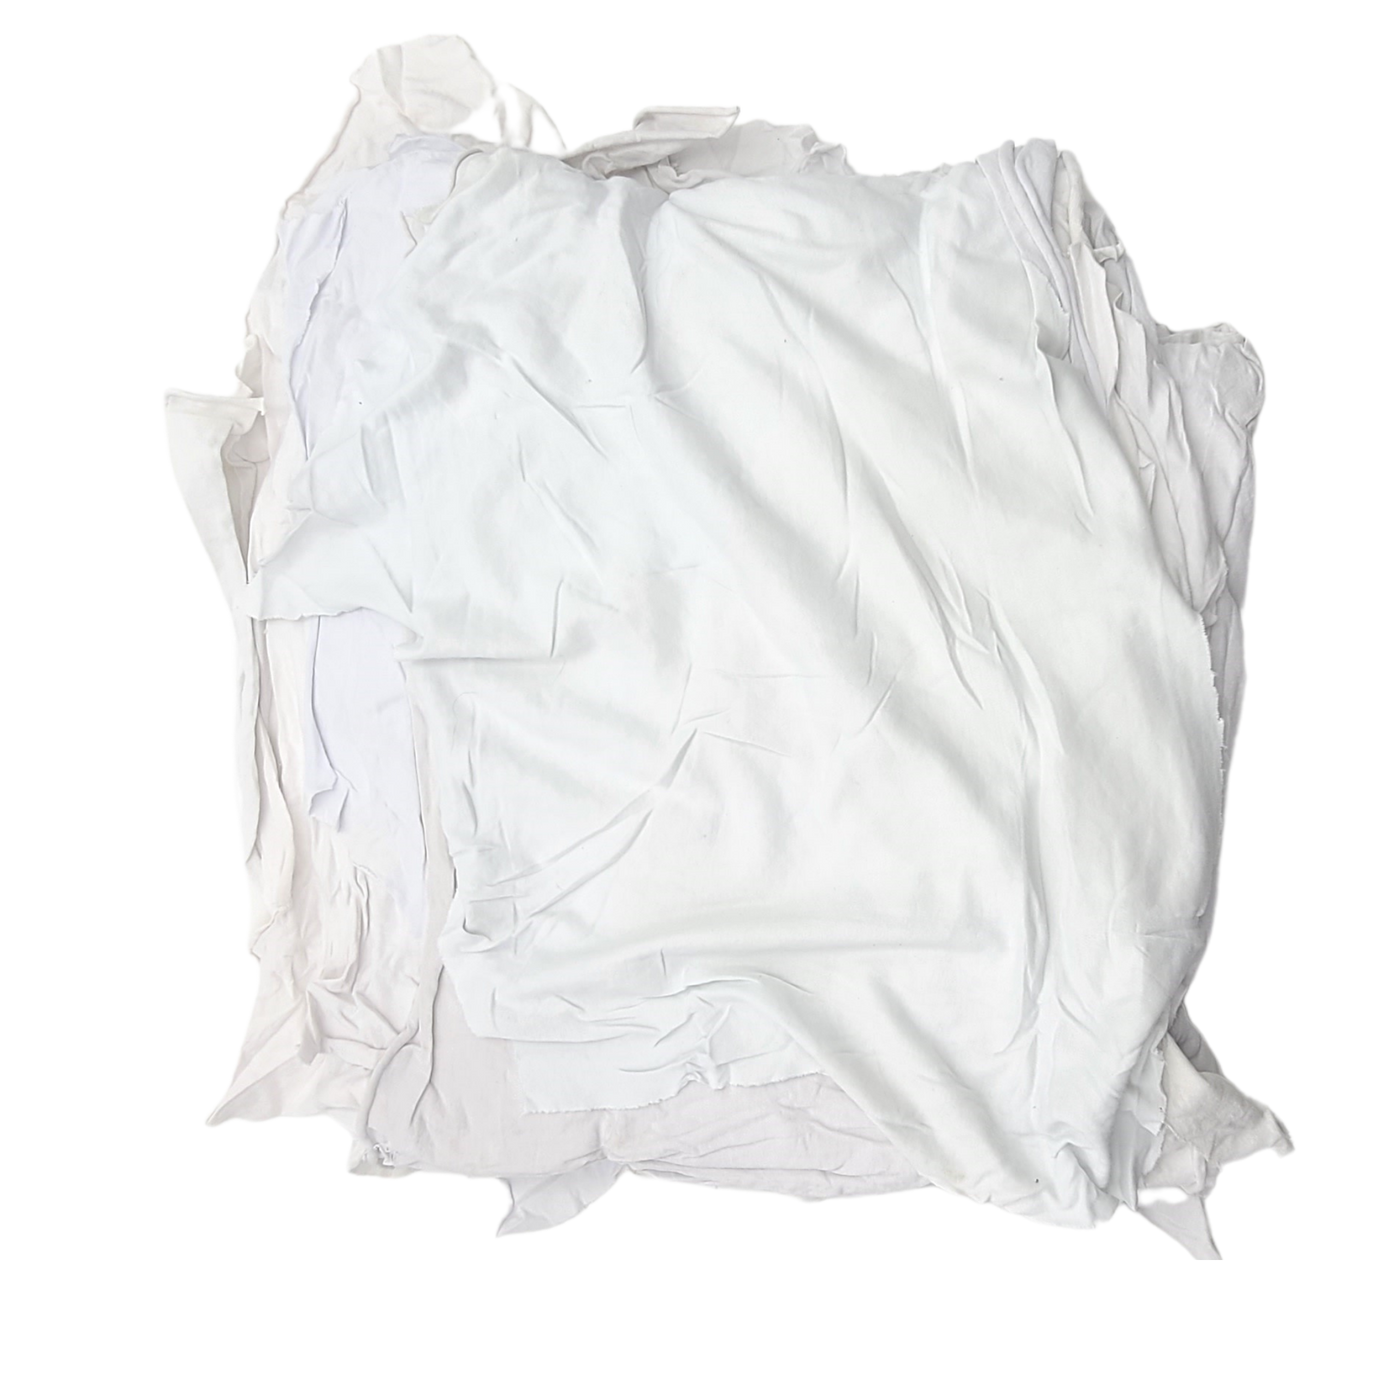 Mixed White Recycled Rags - 50 lbs Box